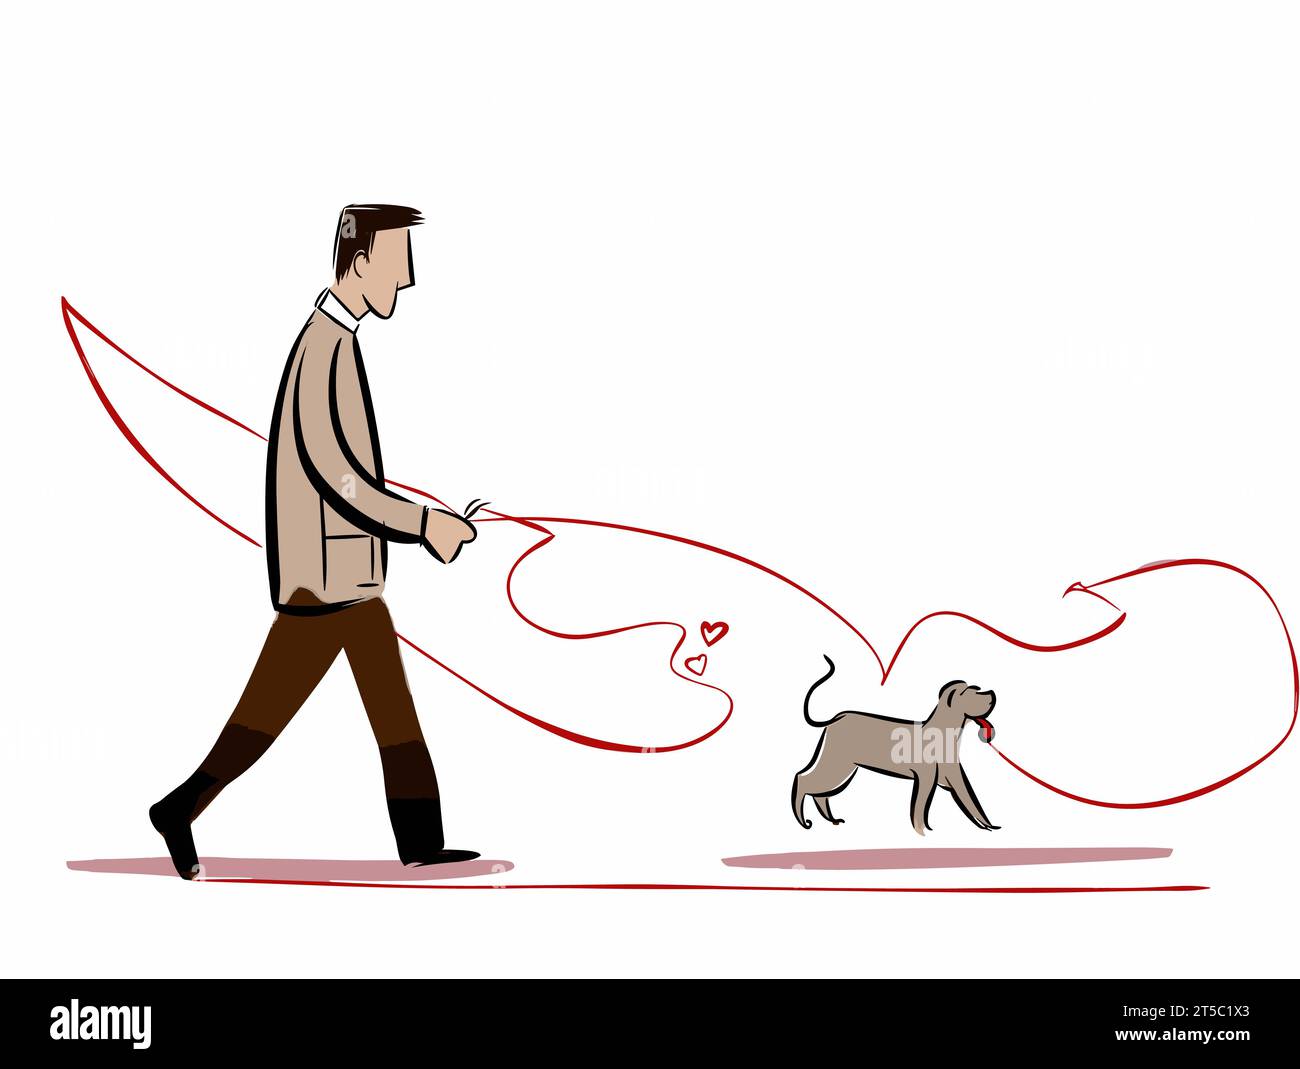 Drawing of Cartoon illustration of man walking his heart illustration separated, sweeping overdrawn lines. Stock Vector